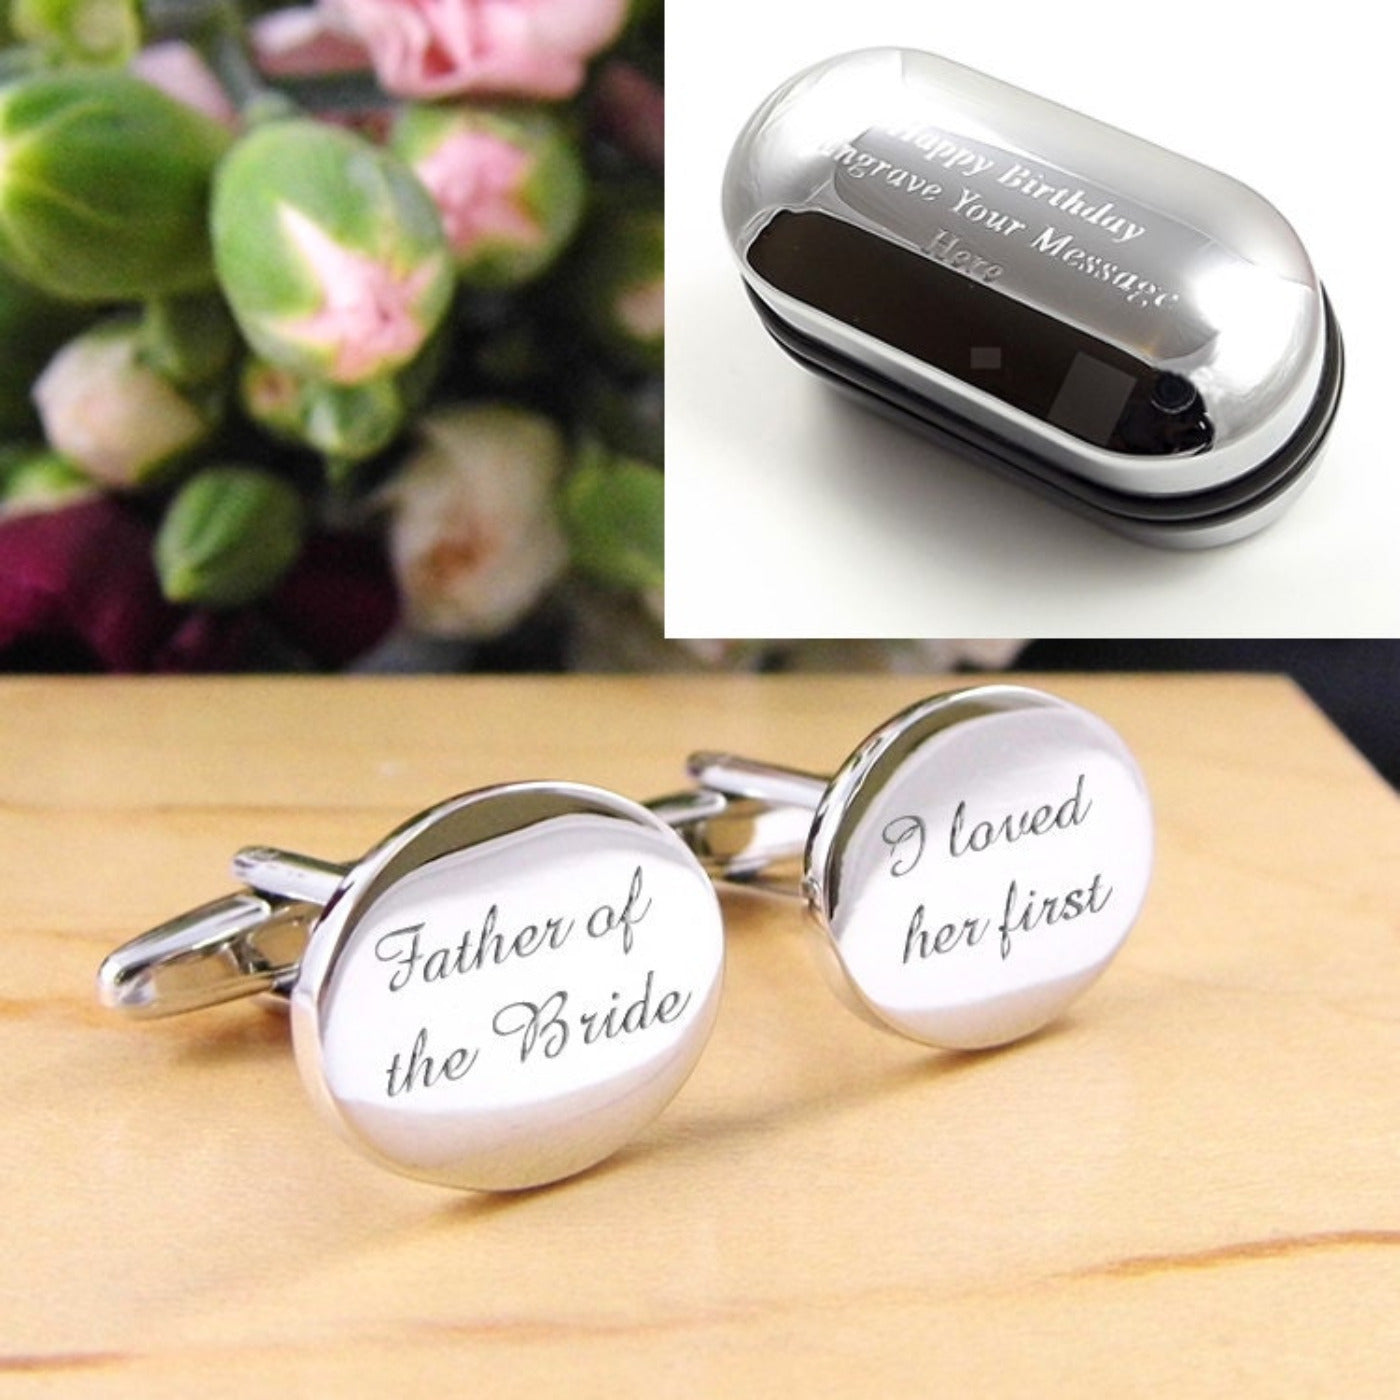 Engraved Wedding Day Oval Cufflinks - Father of the Bride